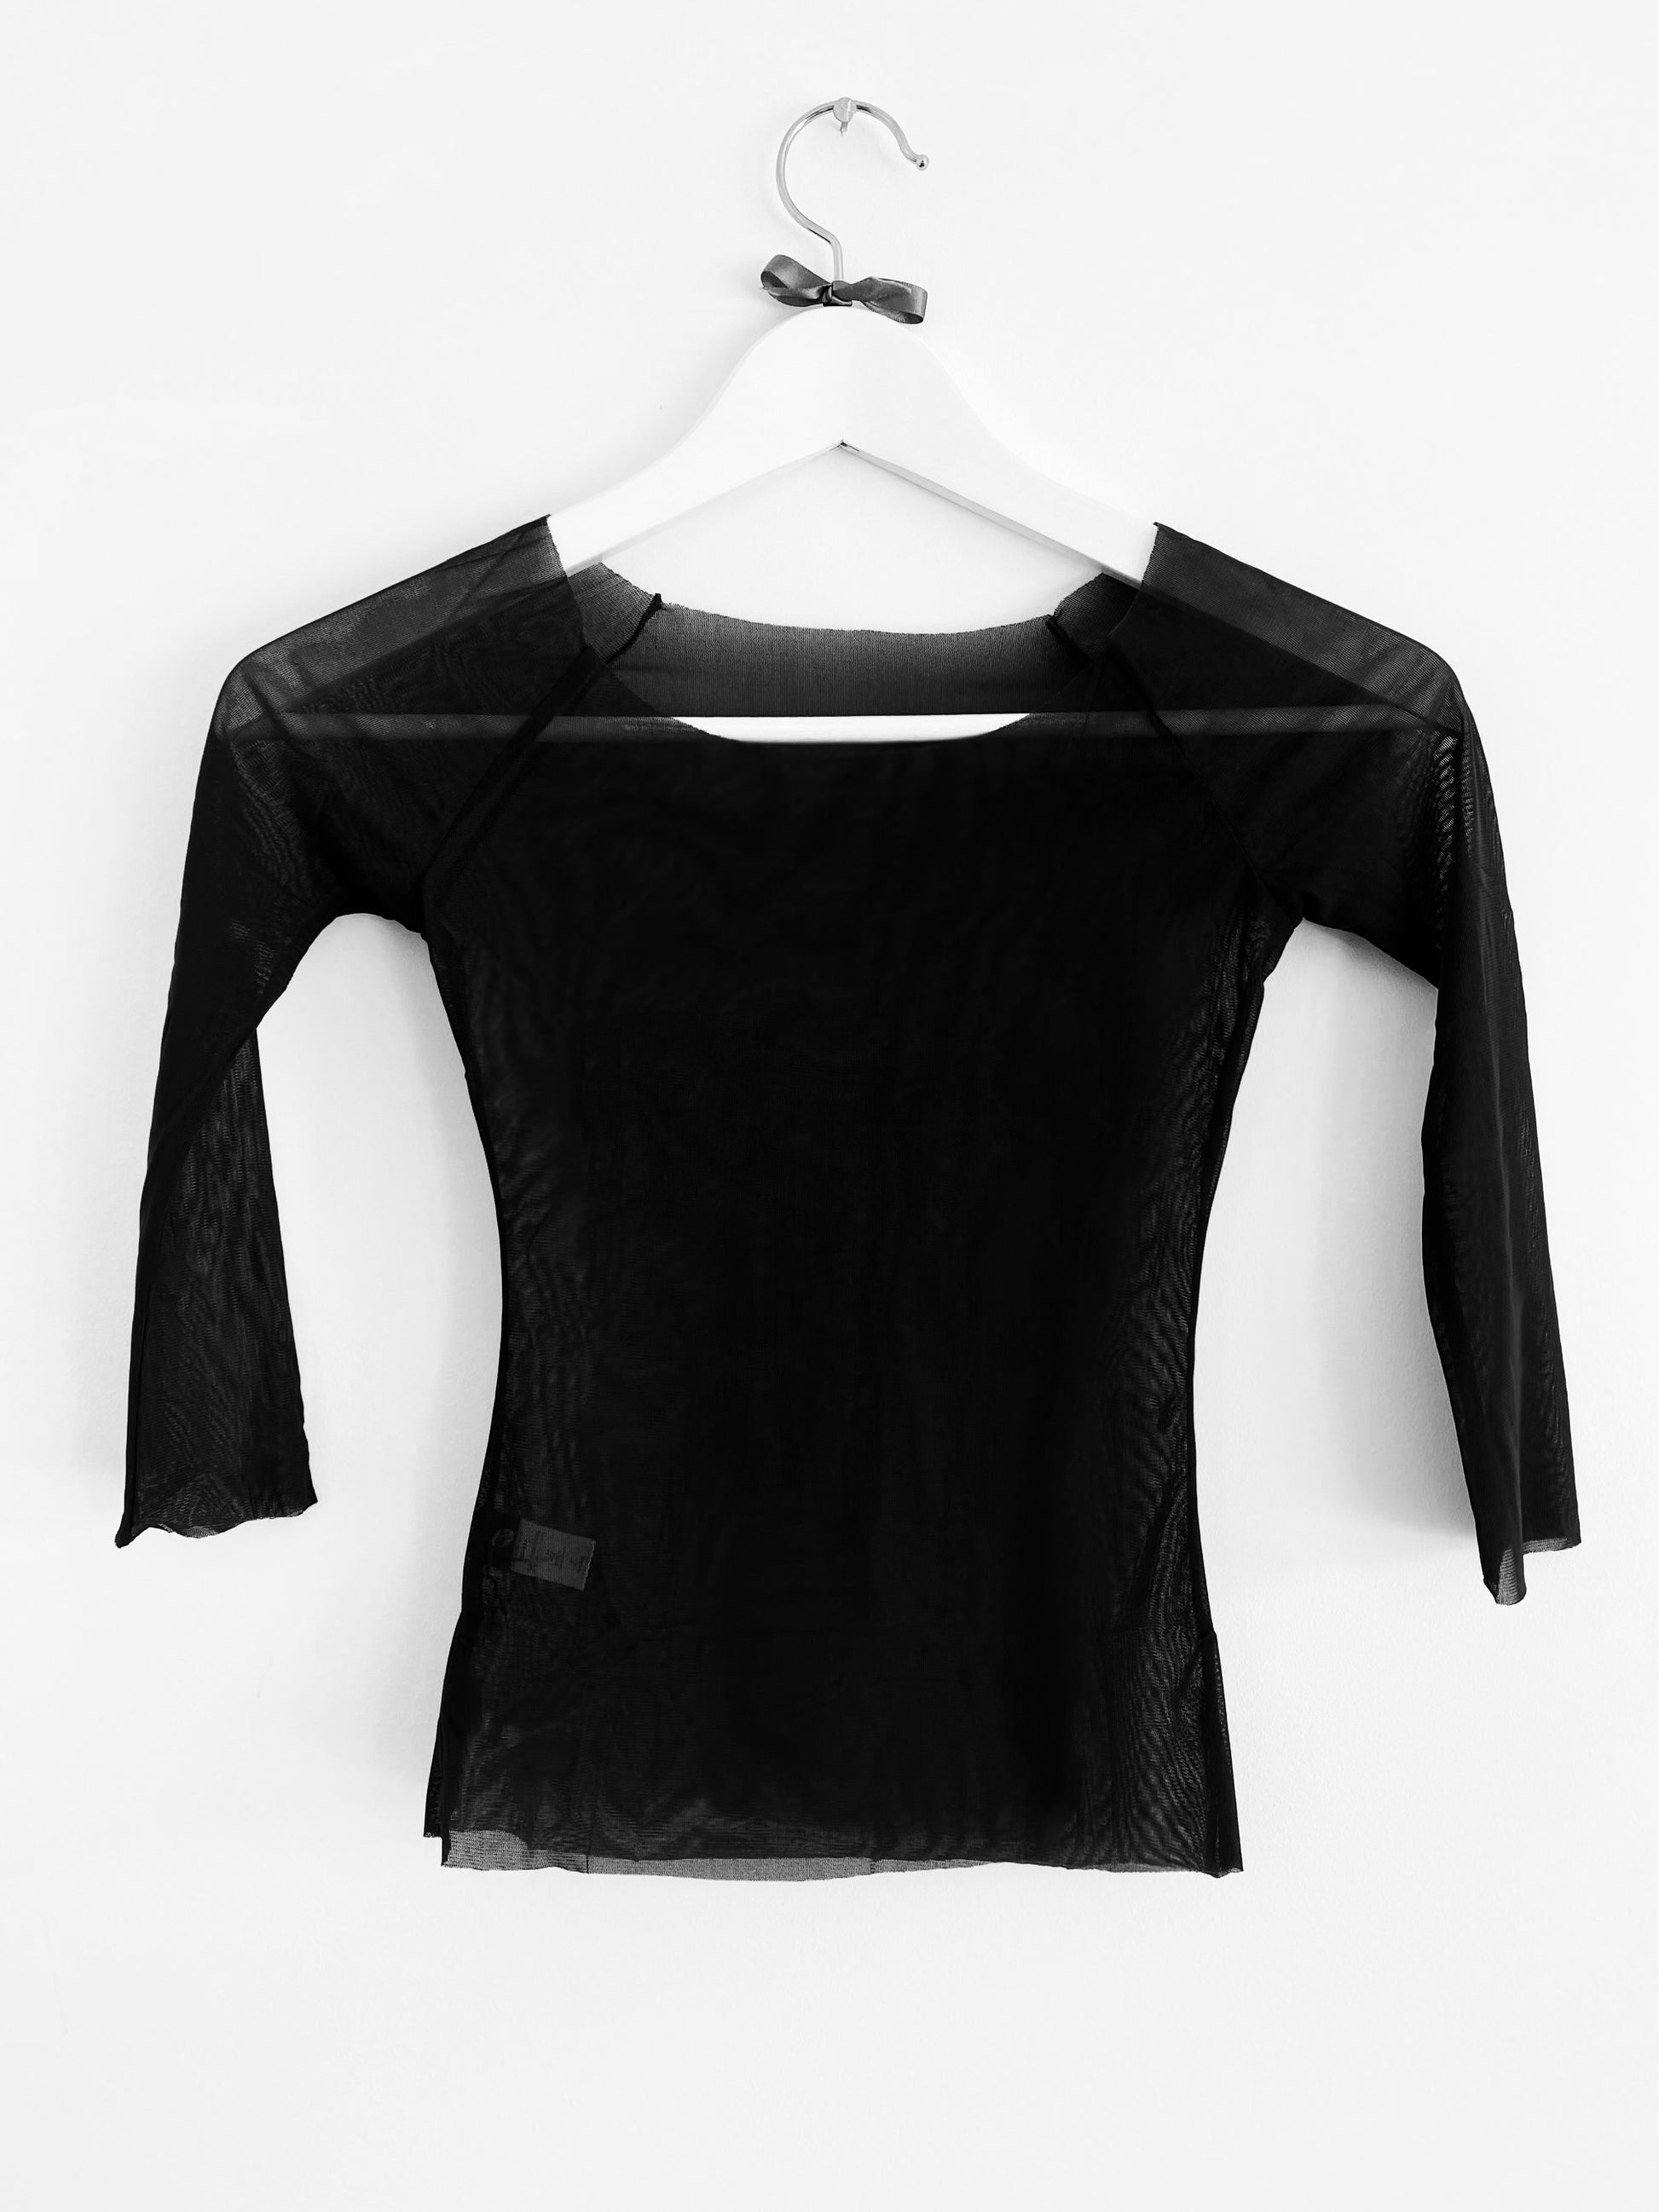 Mesh Top 3/4 Sleeve in black for dance, ballet and warm up from The Collective Dancewear